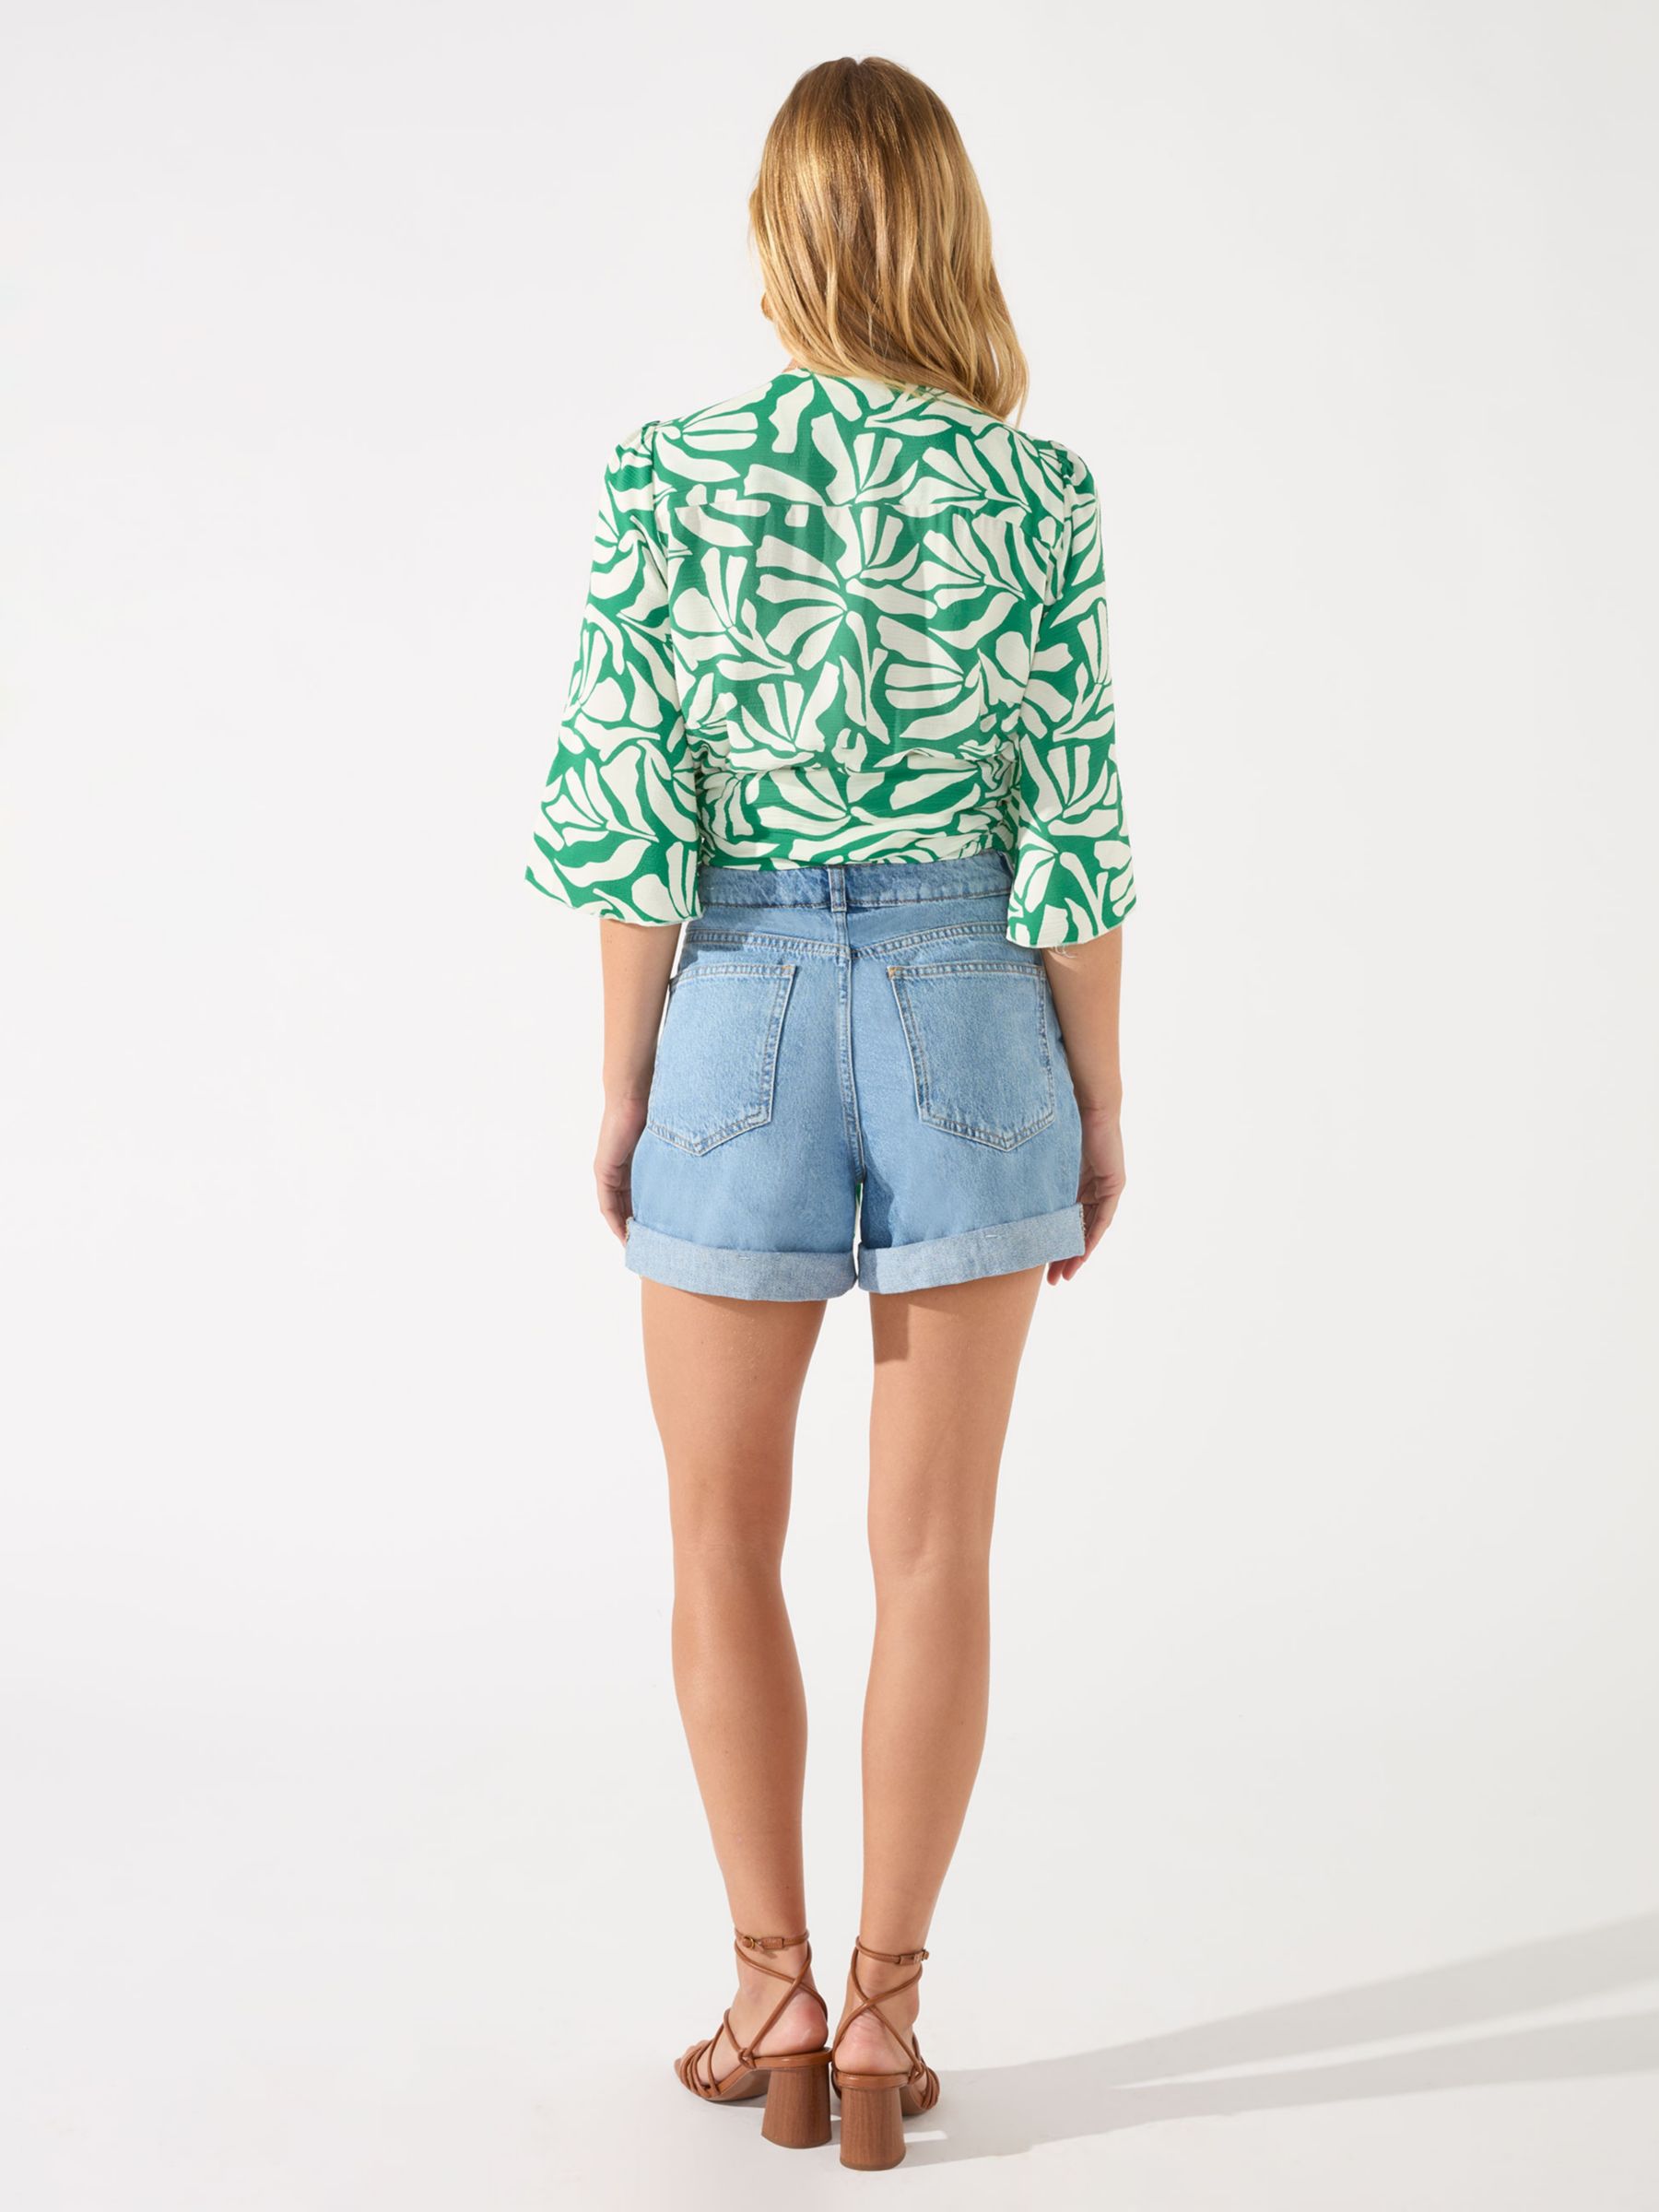 Buy Ro&Zo Graphic Print Wrap Top, Green/White Online at johnlewis.com